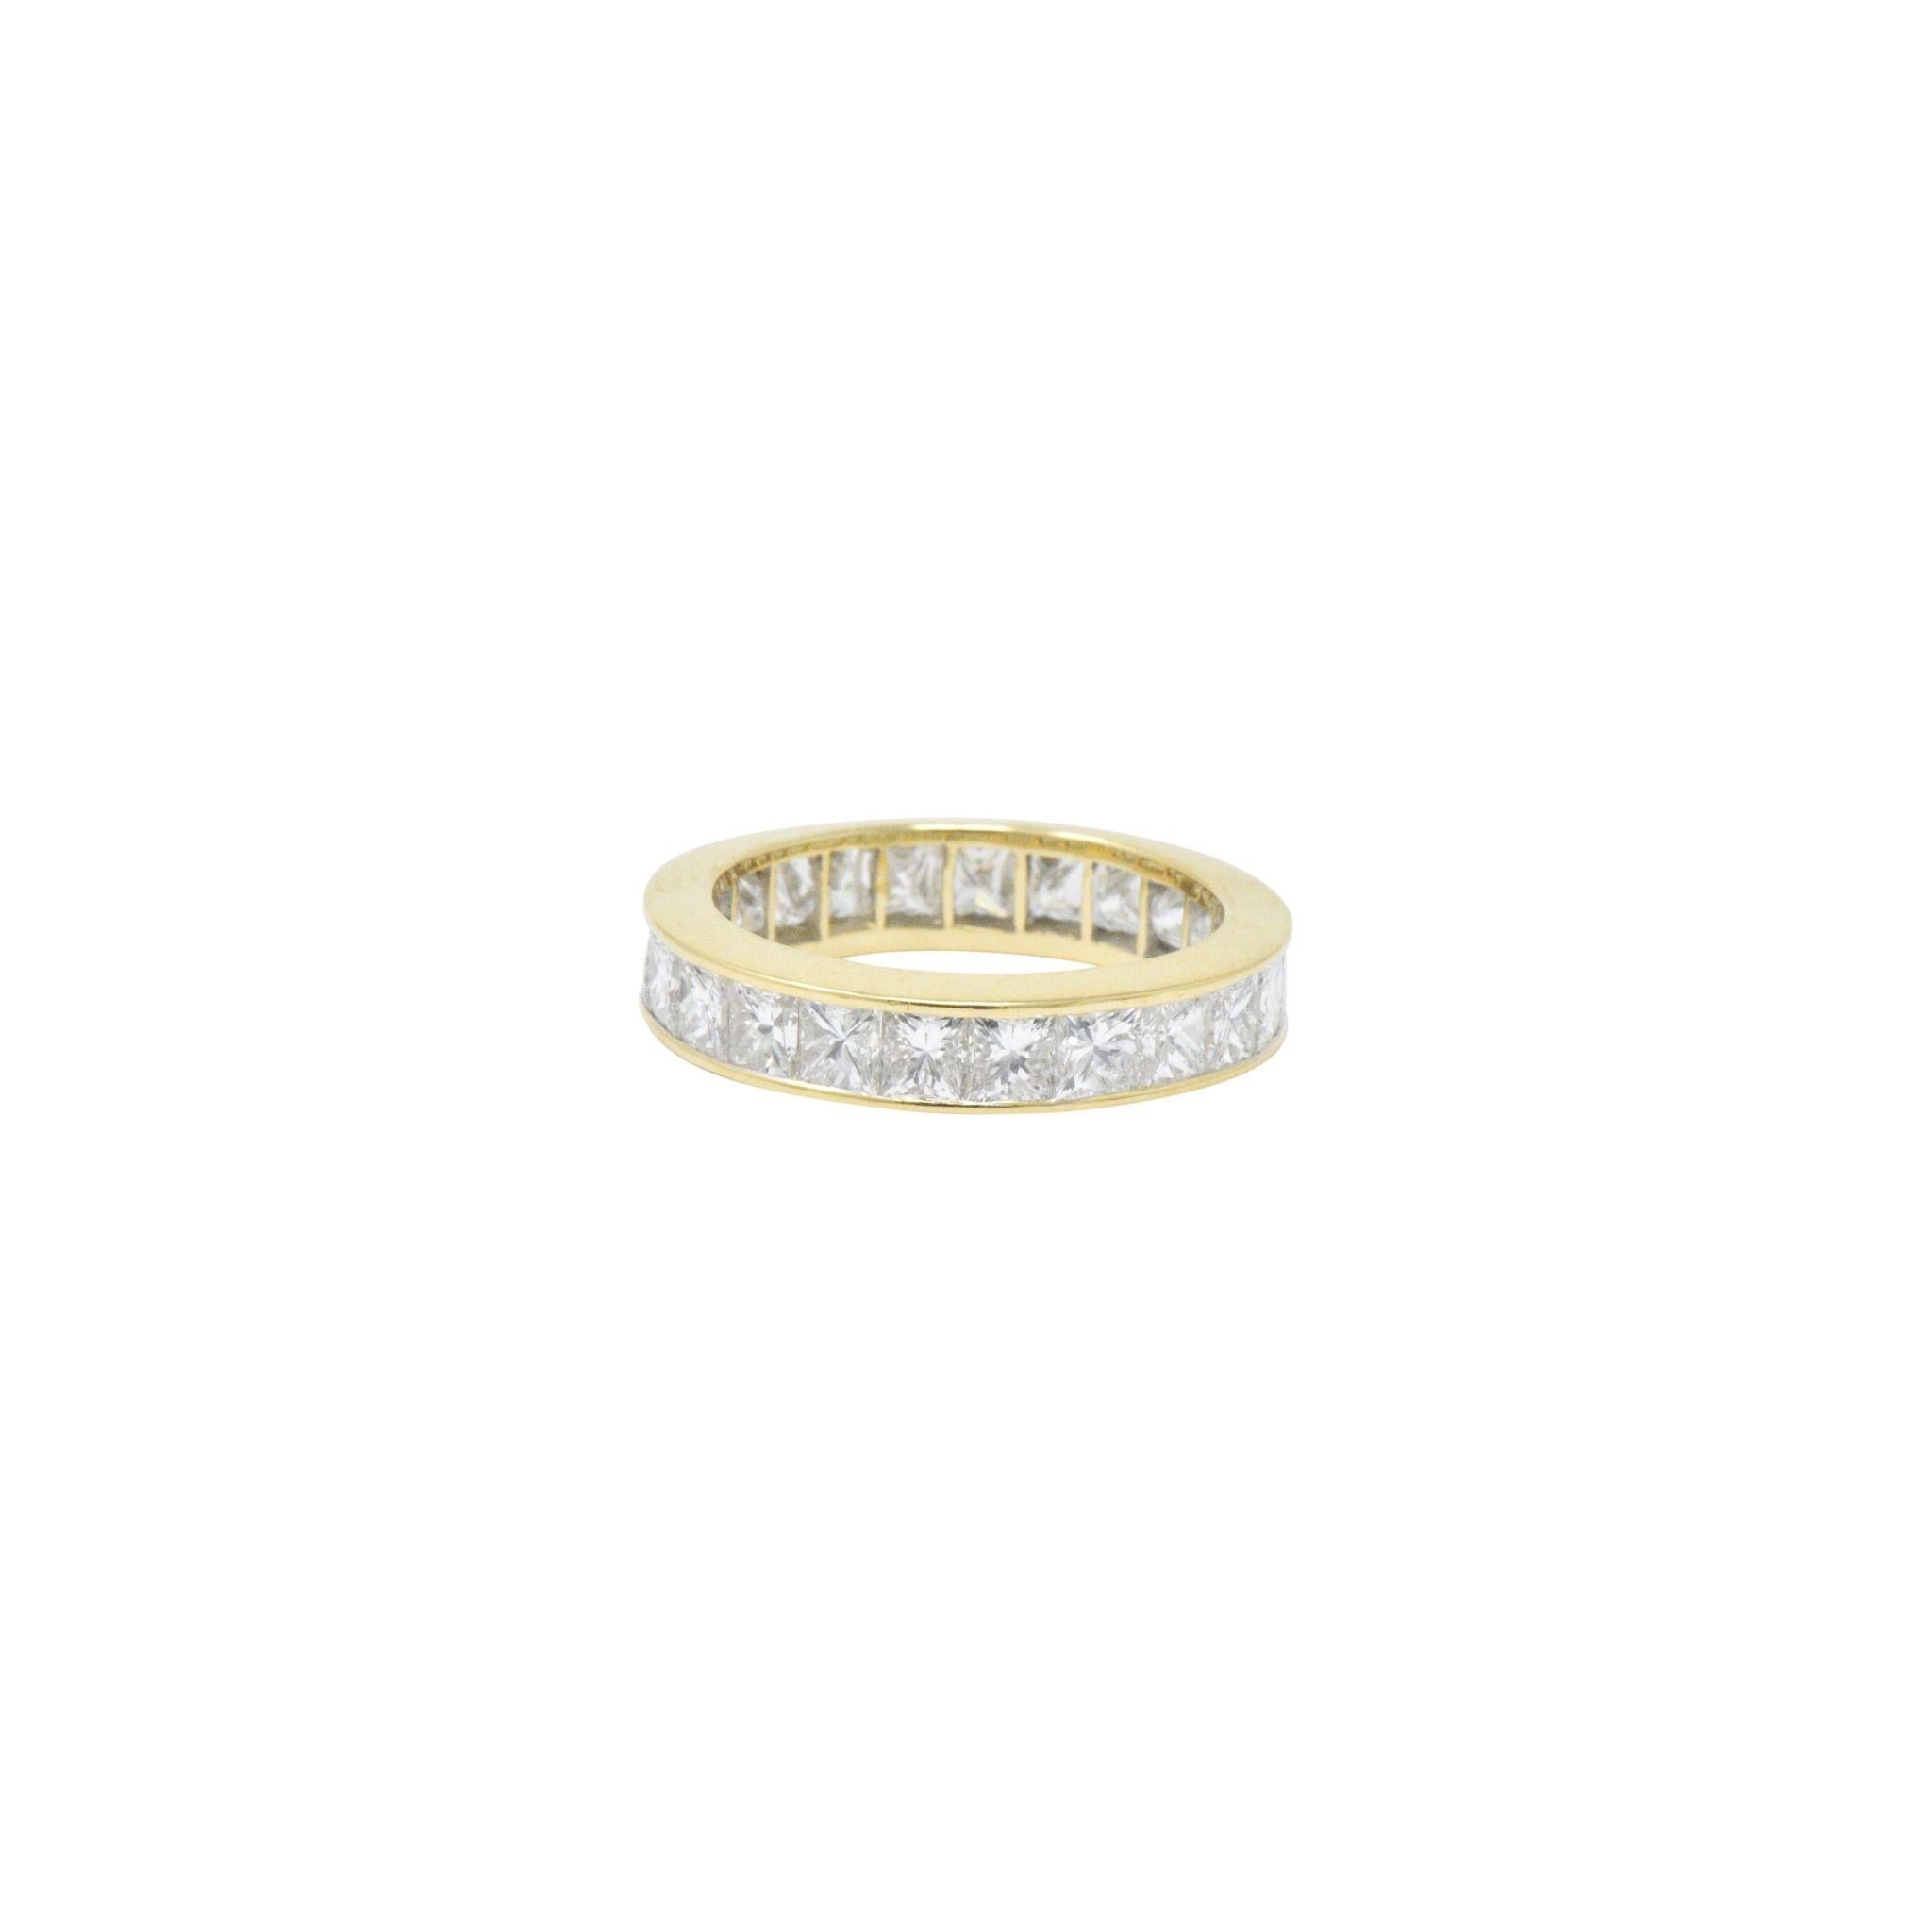 Eternity style band ring channel set fully around by twenty-three very well-matched princess cut diamonds

Total diamond weight is approximately 3.25 carats, G/H color with VVS to VS clarity

Completed by highly polished channel walls

Tested as 18